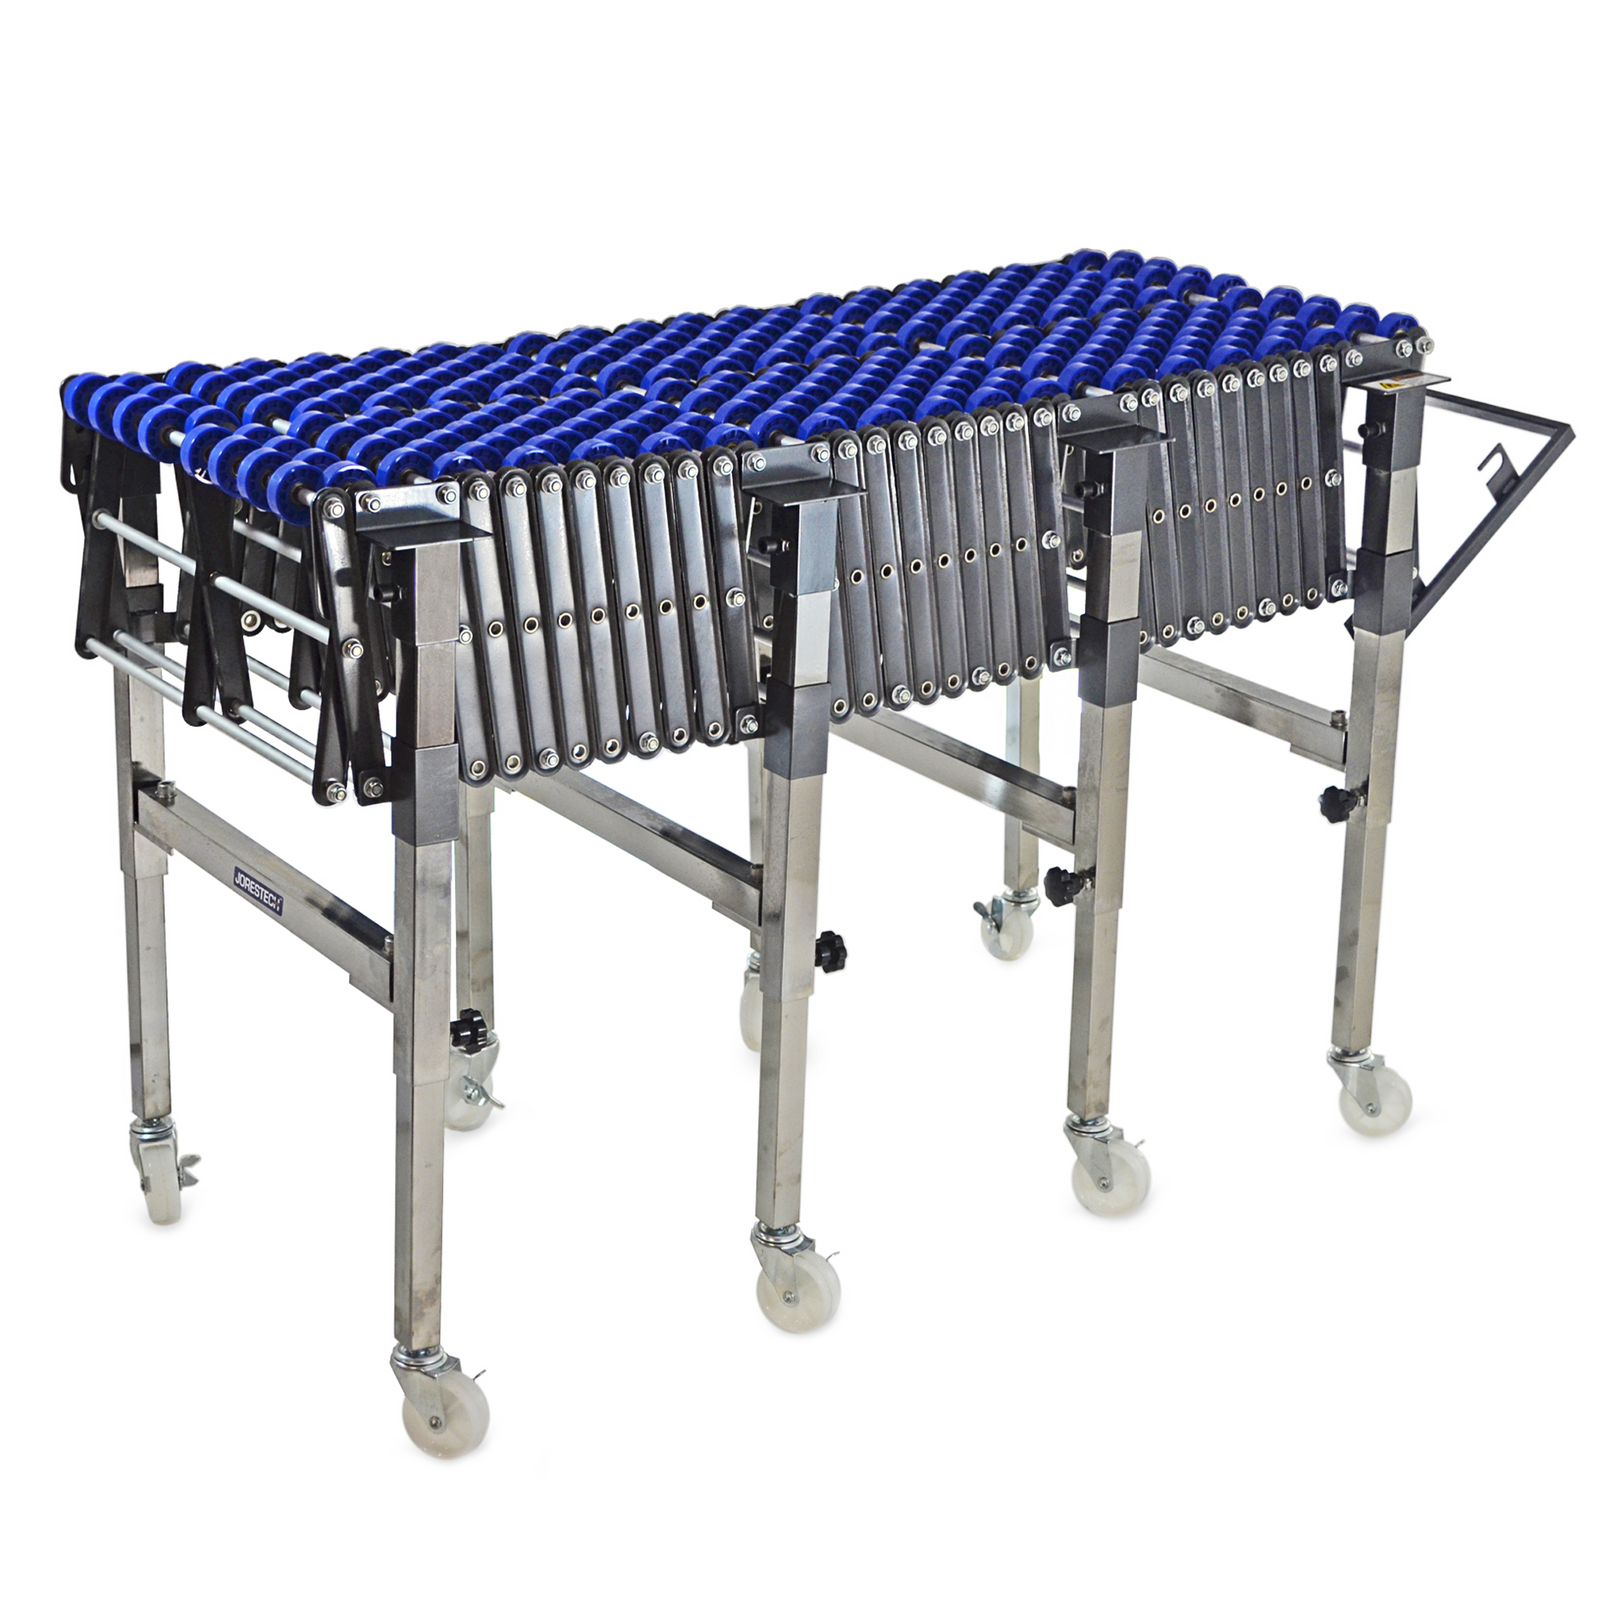 JORES TECHNOLOGIES® gravity skate wheel conveyor in a compressed position with steel frame, blue wheels, and rolling casters 